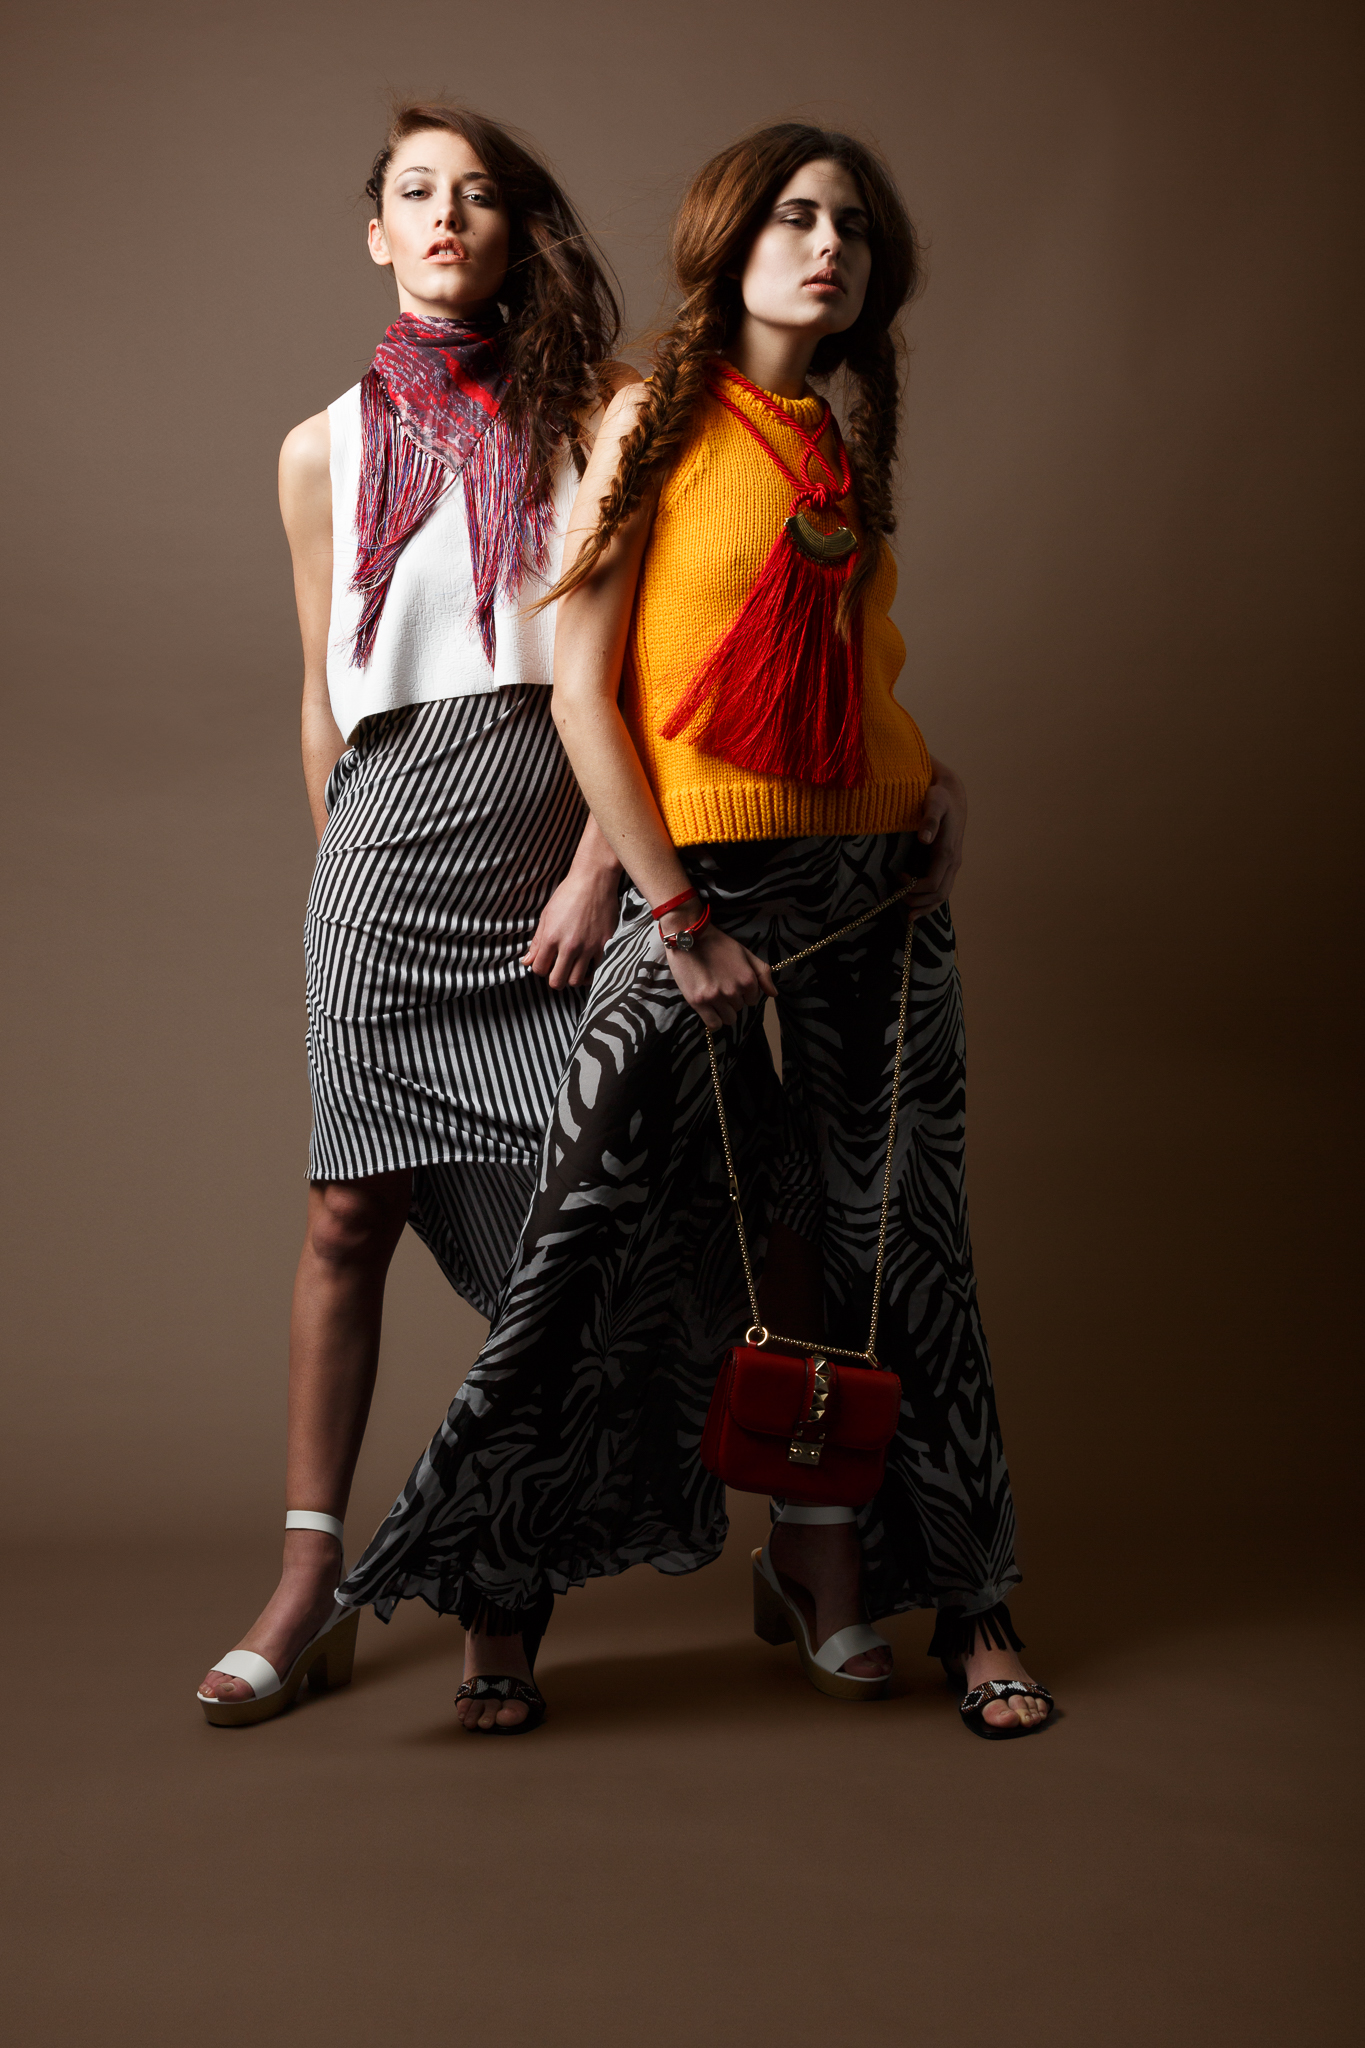 Julia & Holly. Fashion editorial for the View Magazine